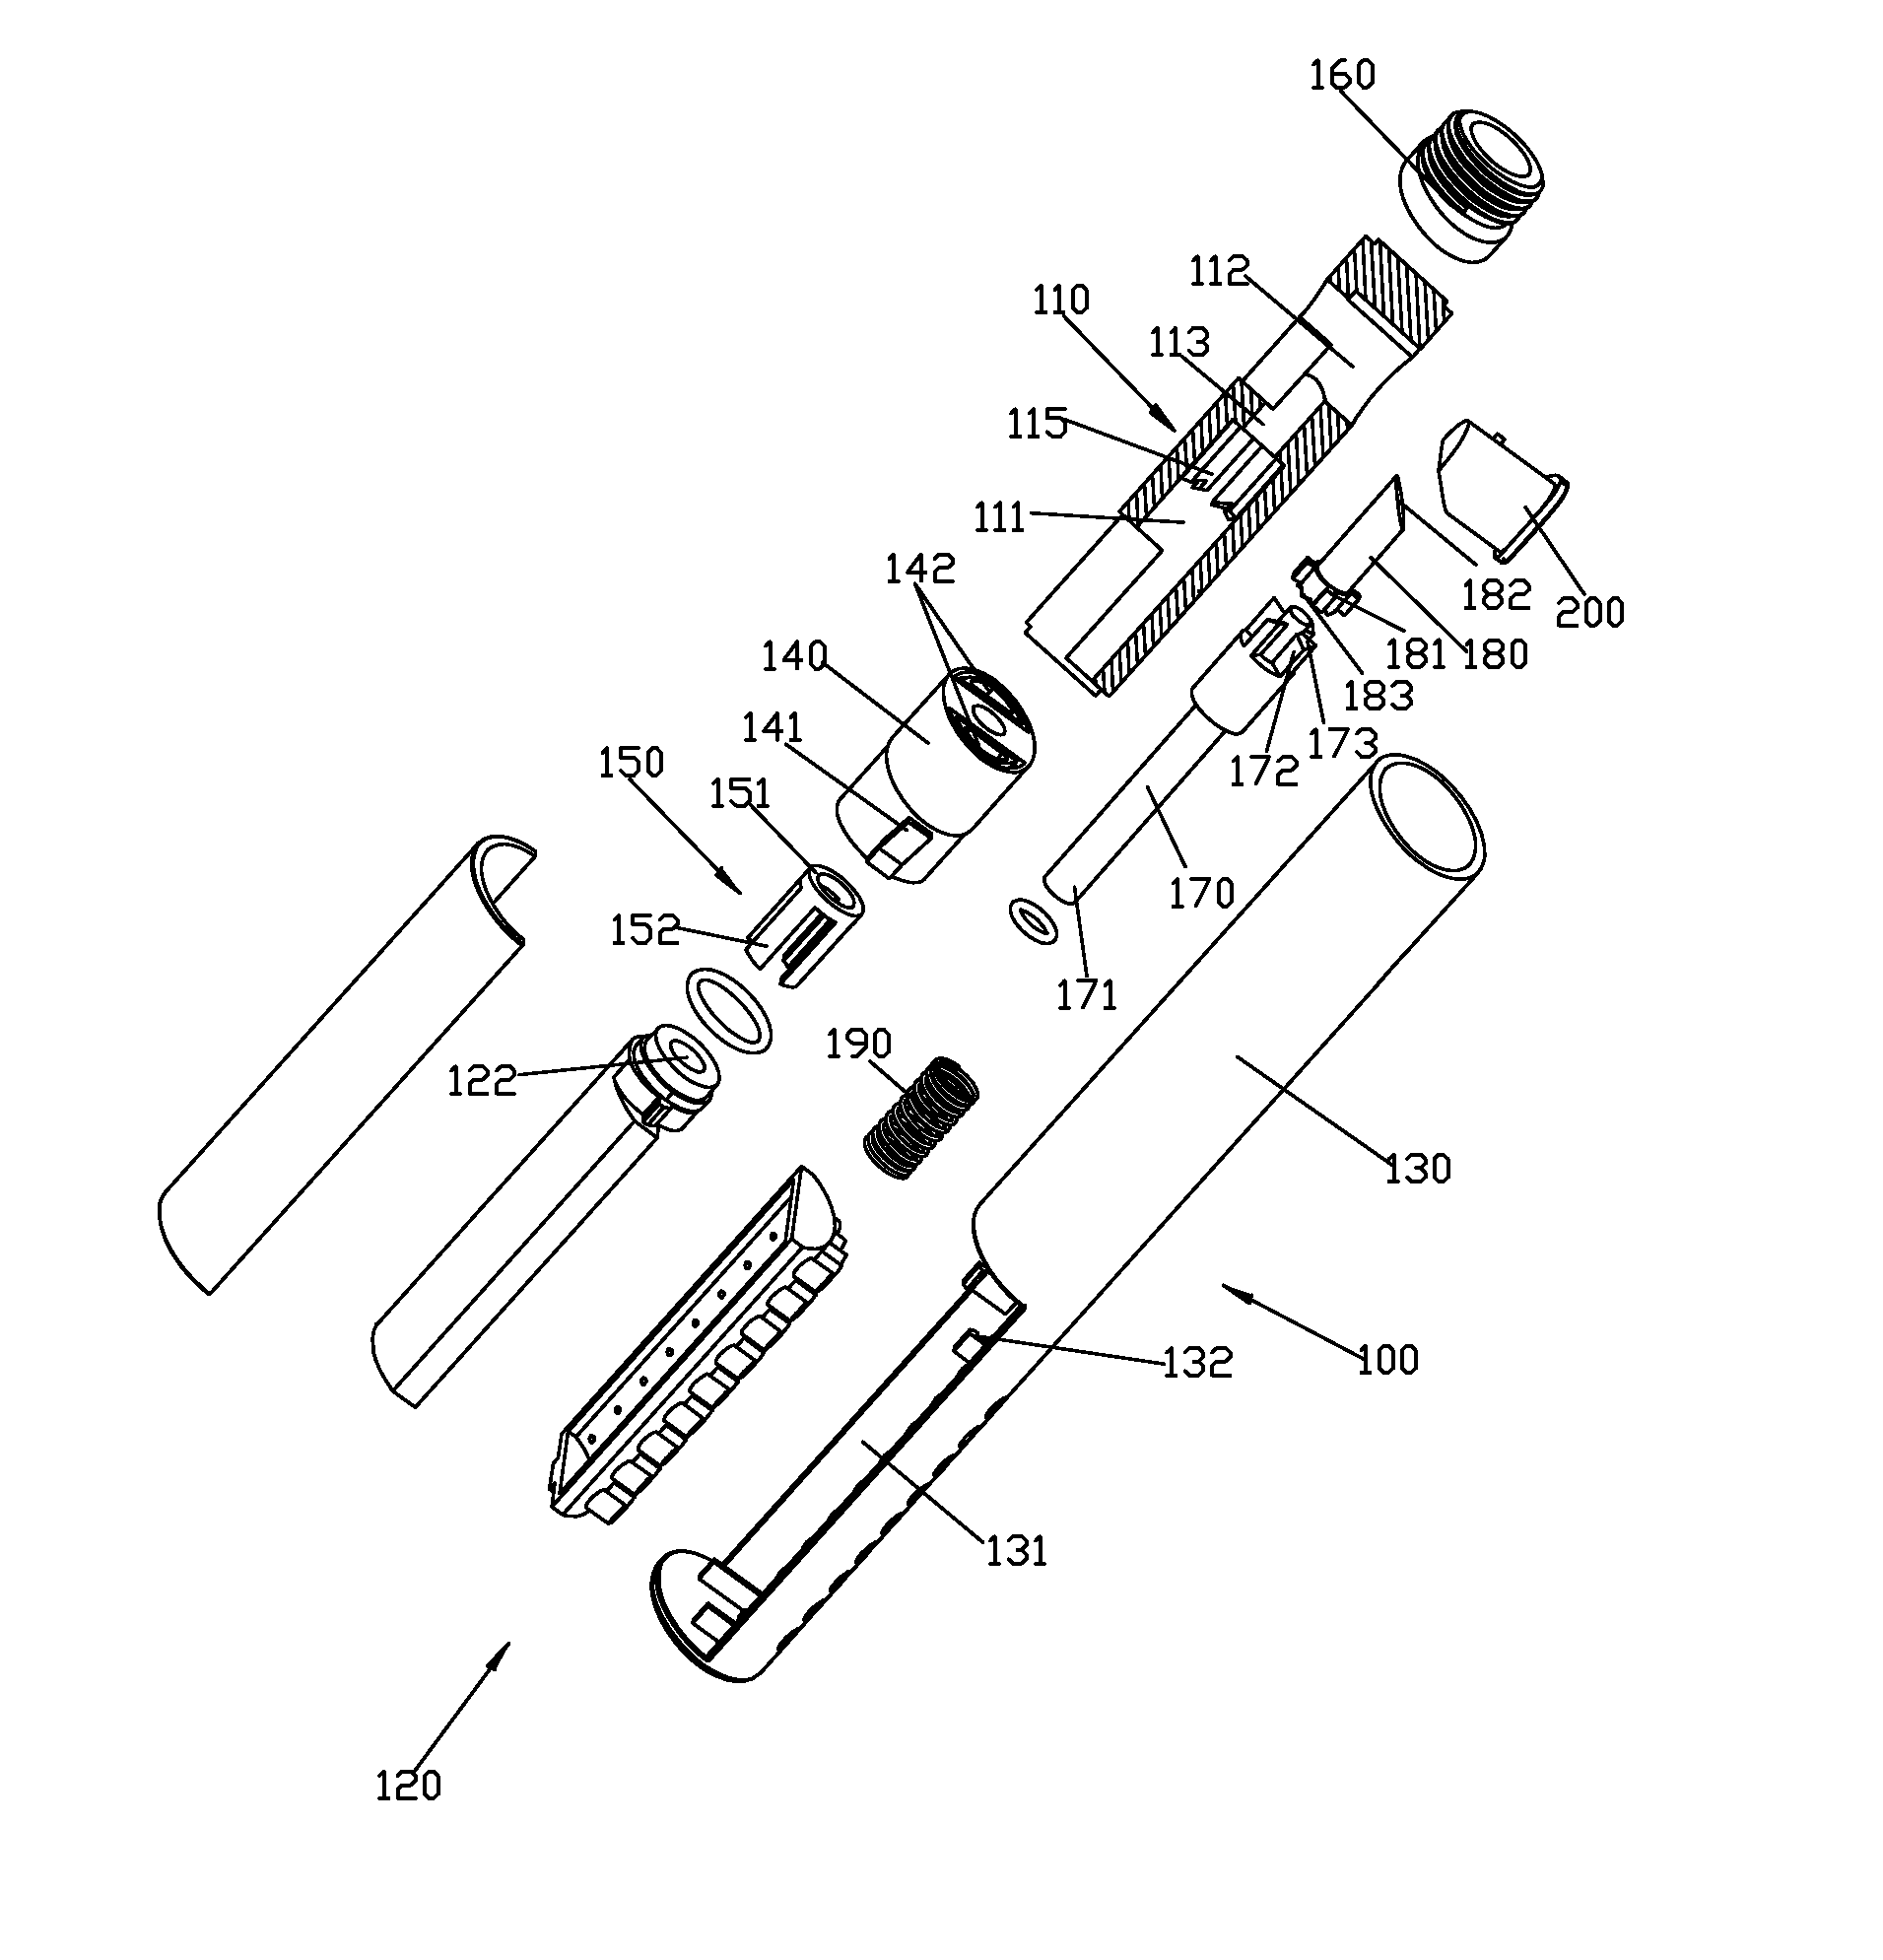 Flow adjusting device with a button